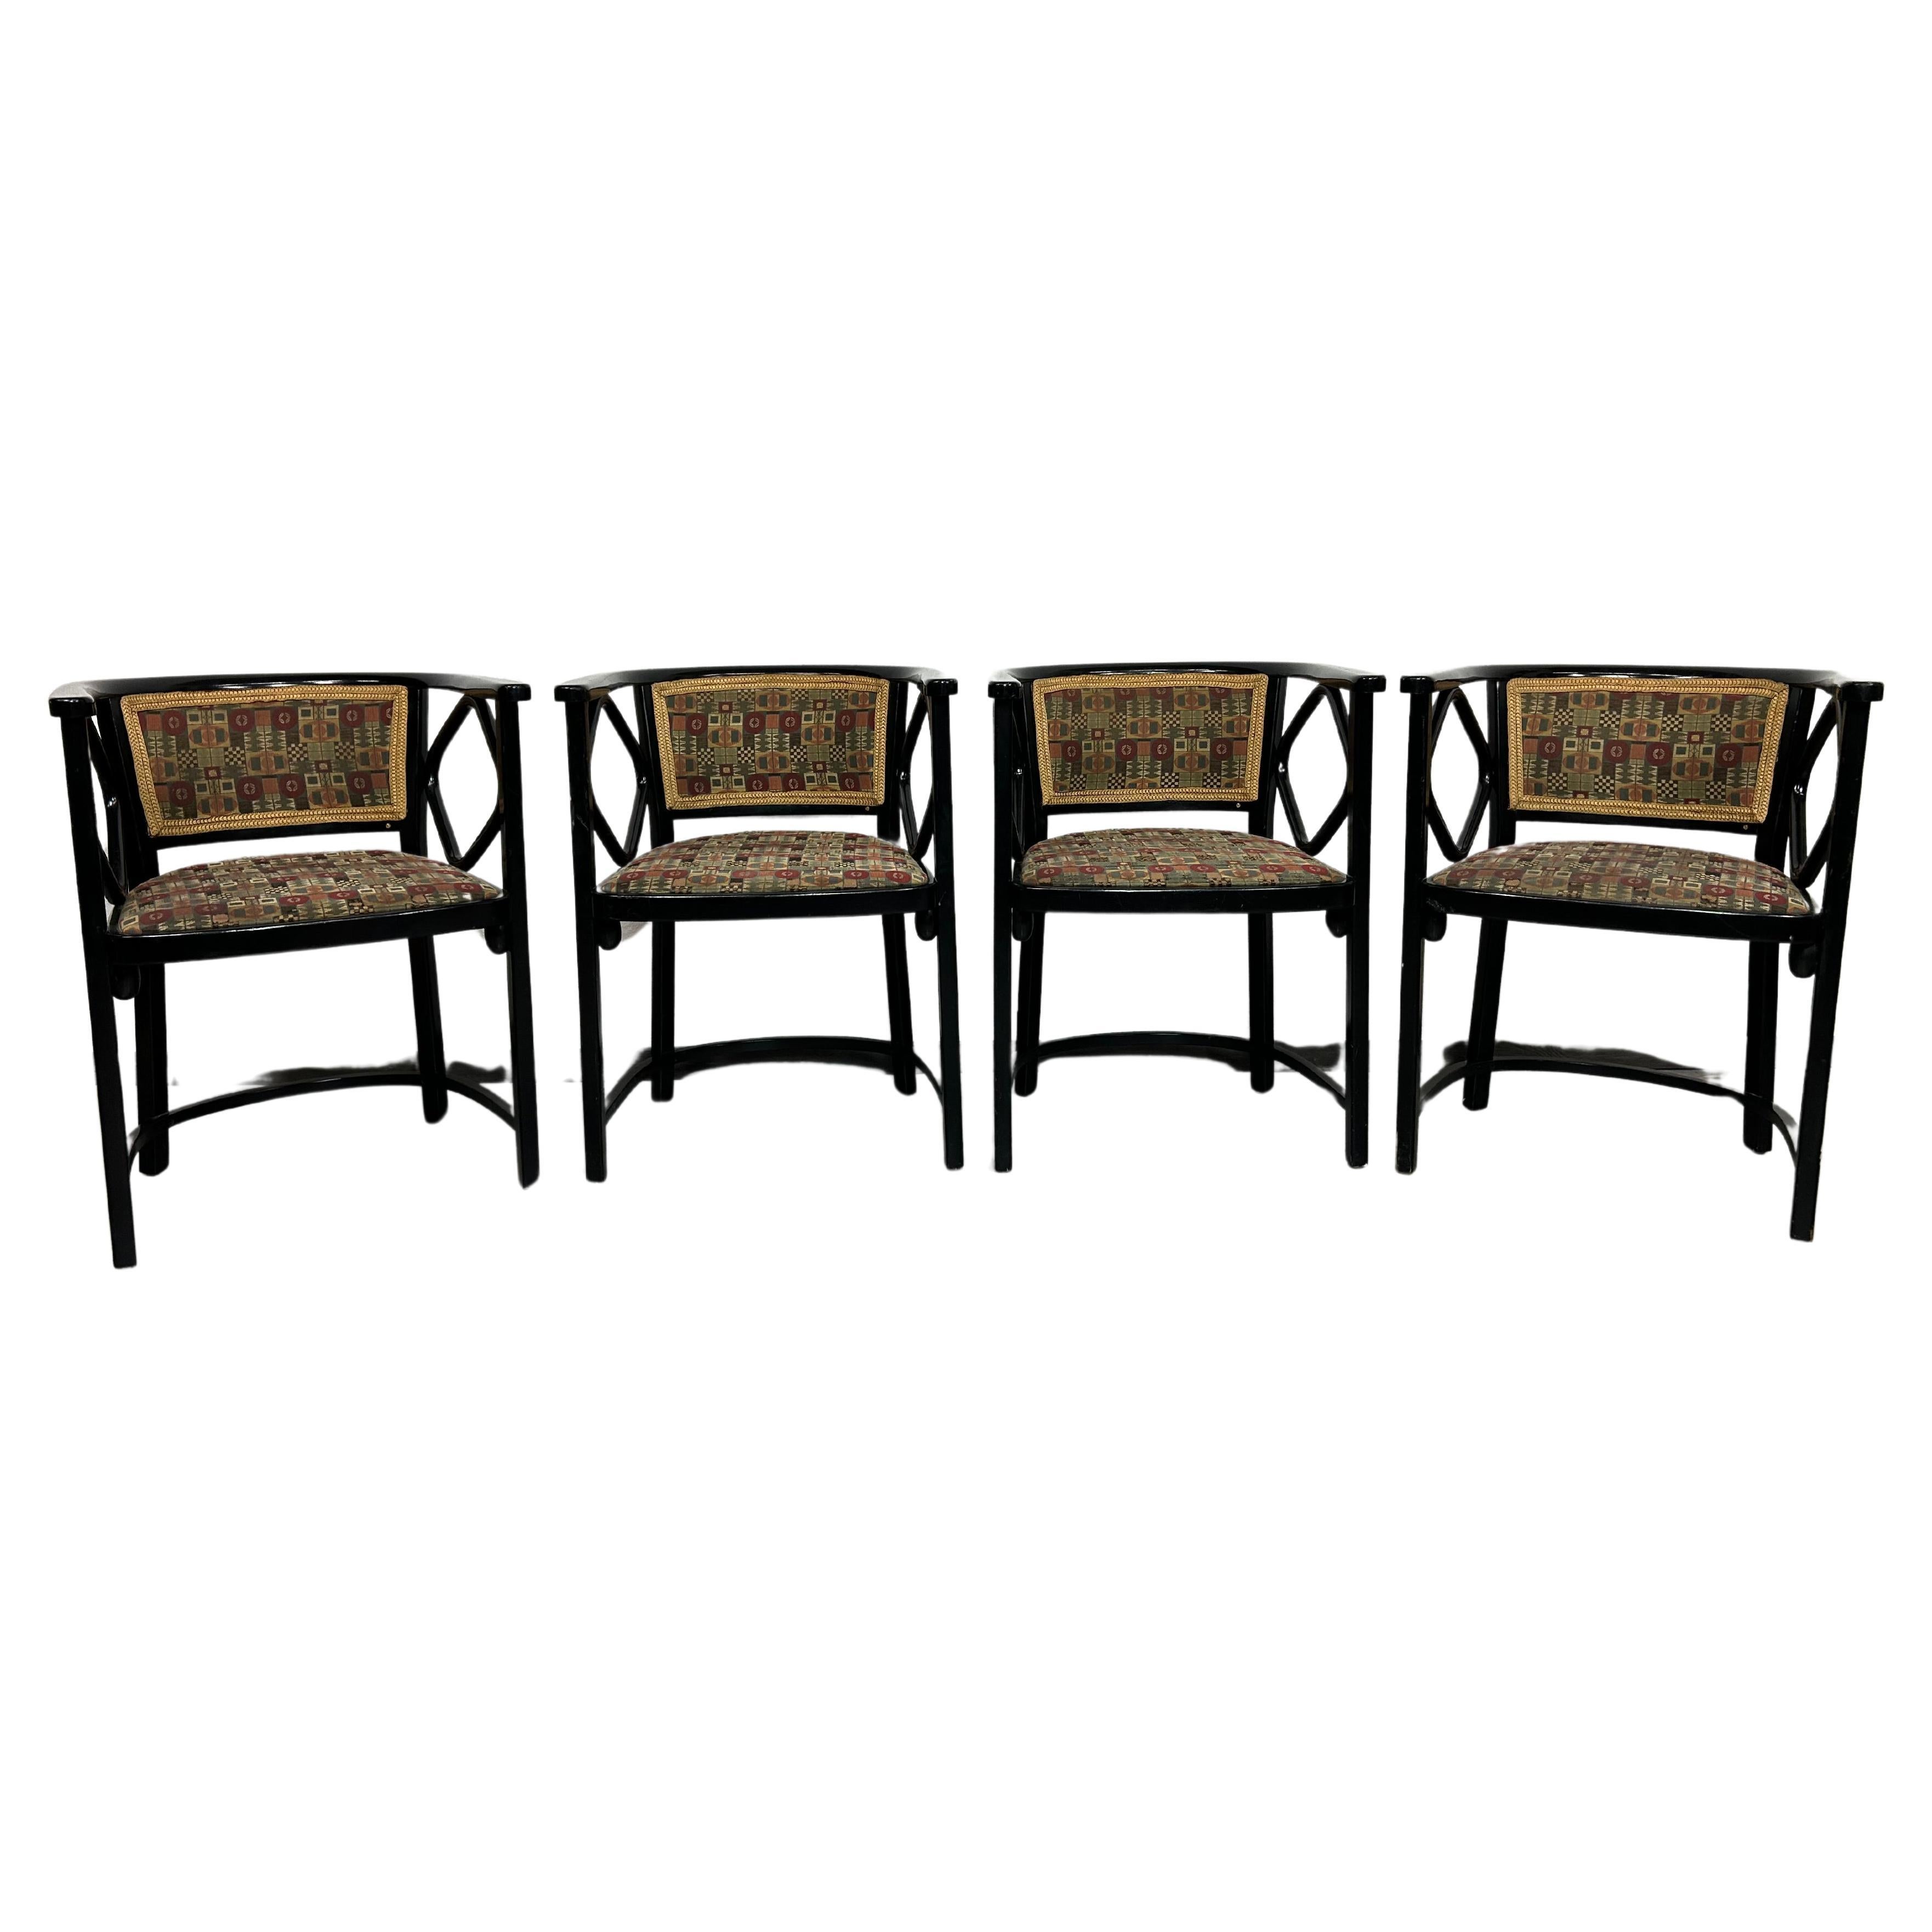 Set of 4 Fledermaus chairs by Josef Hoffmann For Thonet For Sale